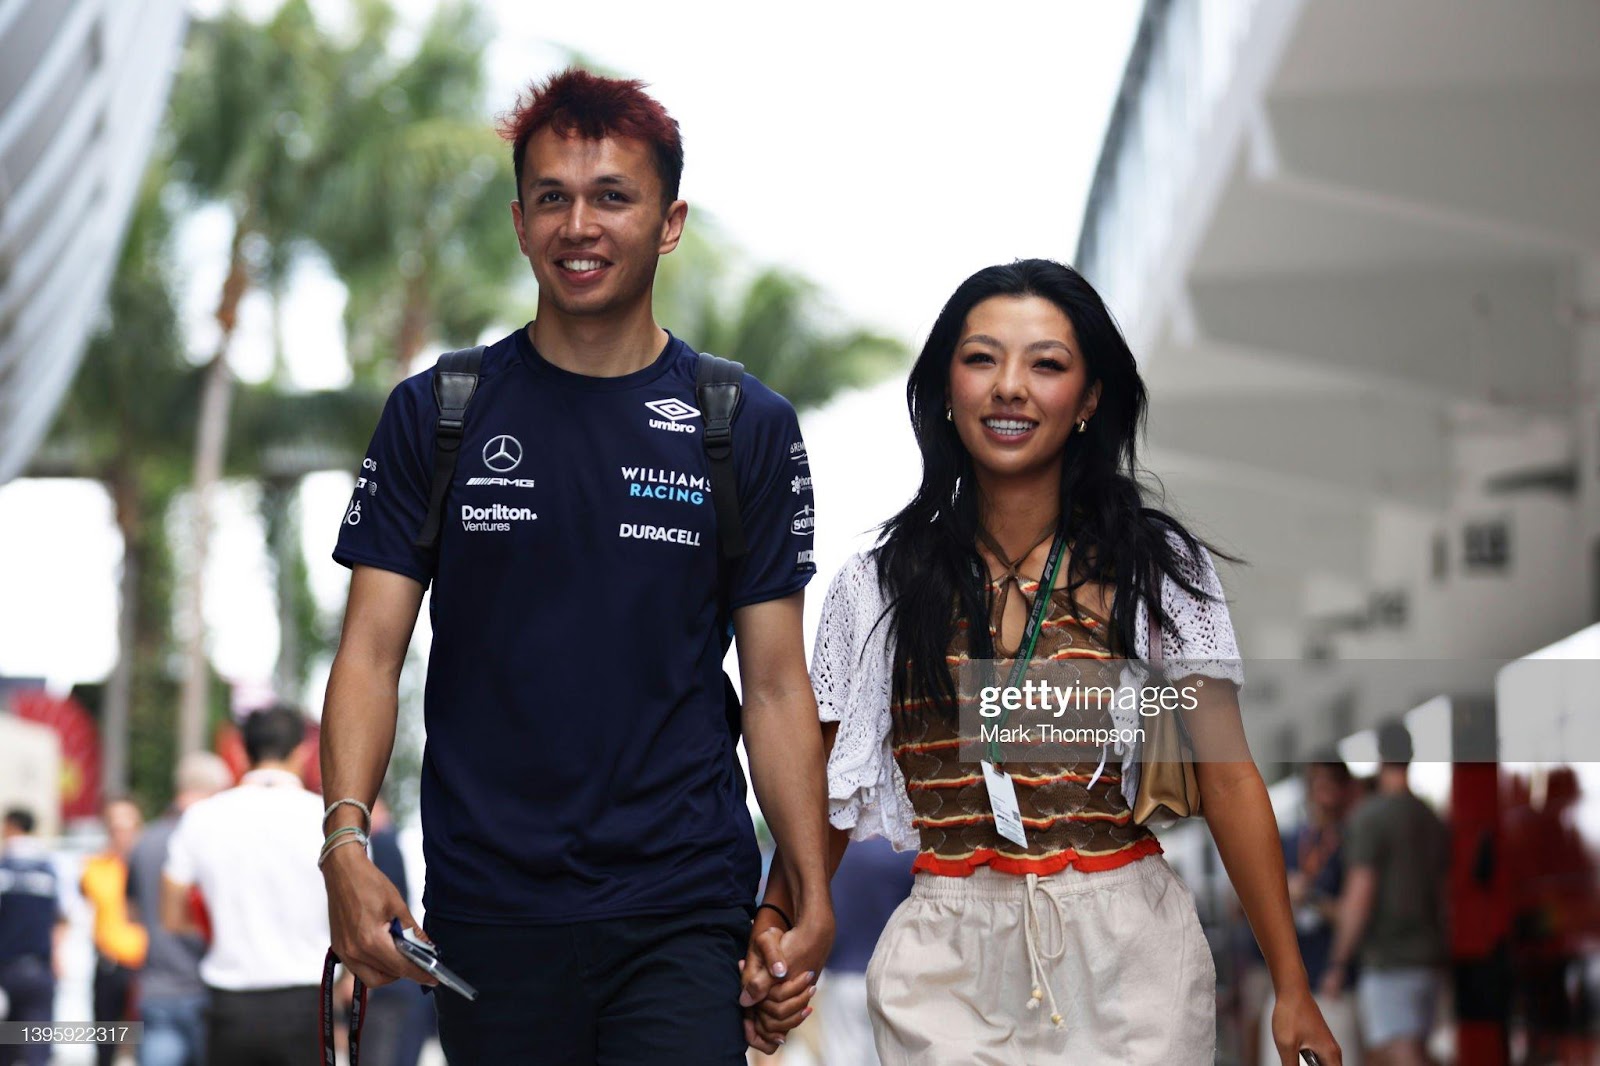 D:\Documenti\posts\posts\Miami\New folder\donne\donne piloti\alexander-albon-of-thailand-and-williams-walks-in-the-paddock-with-picture-id1395922317.jpg